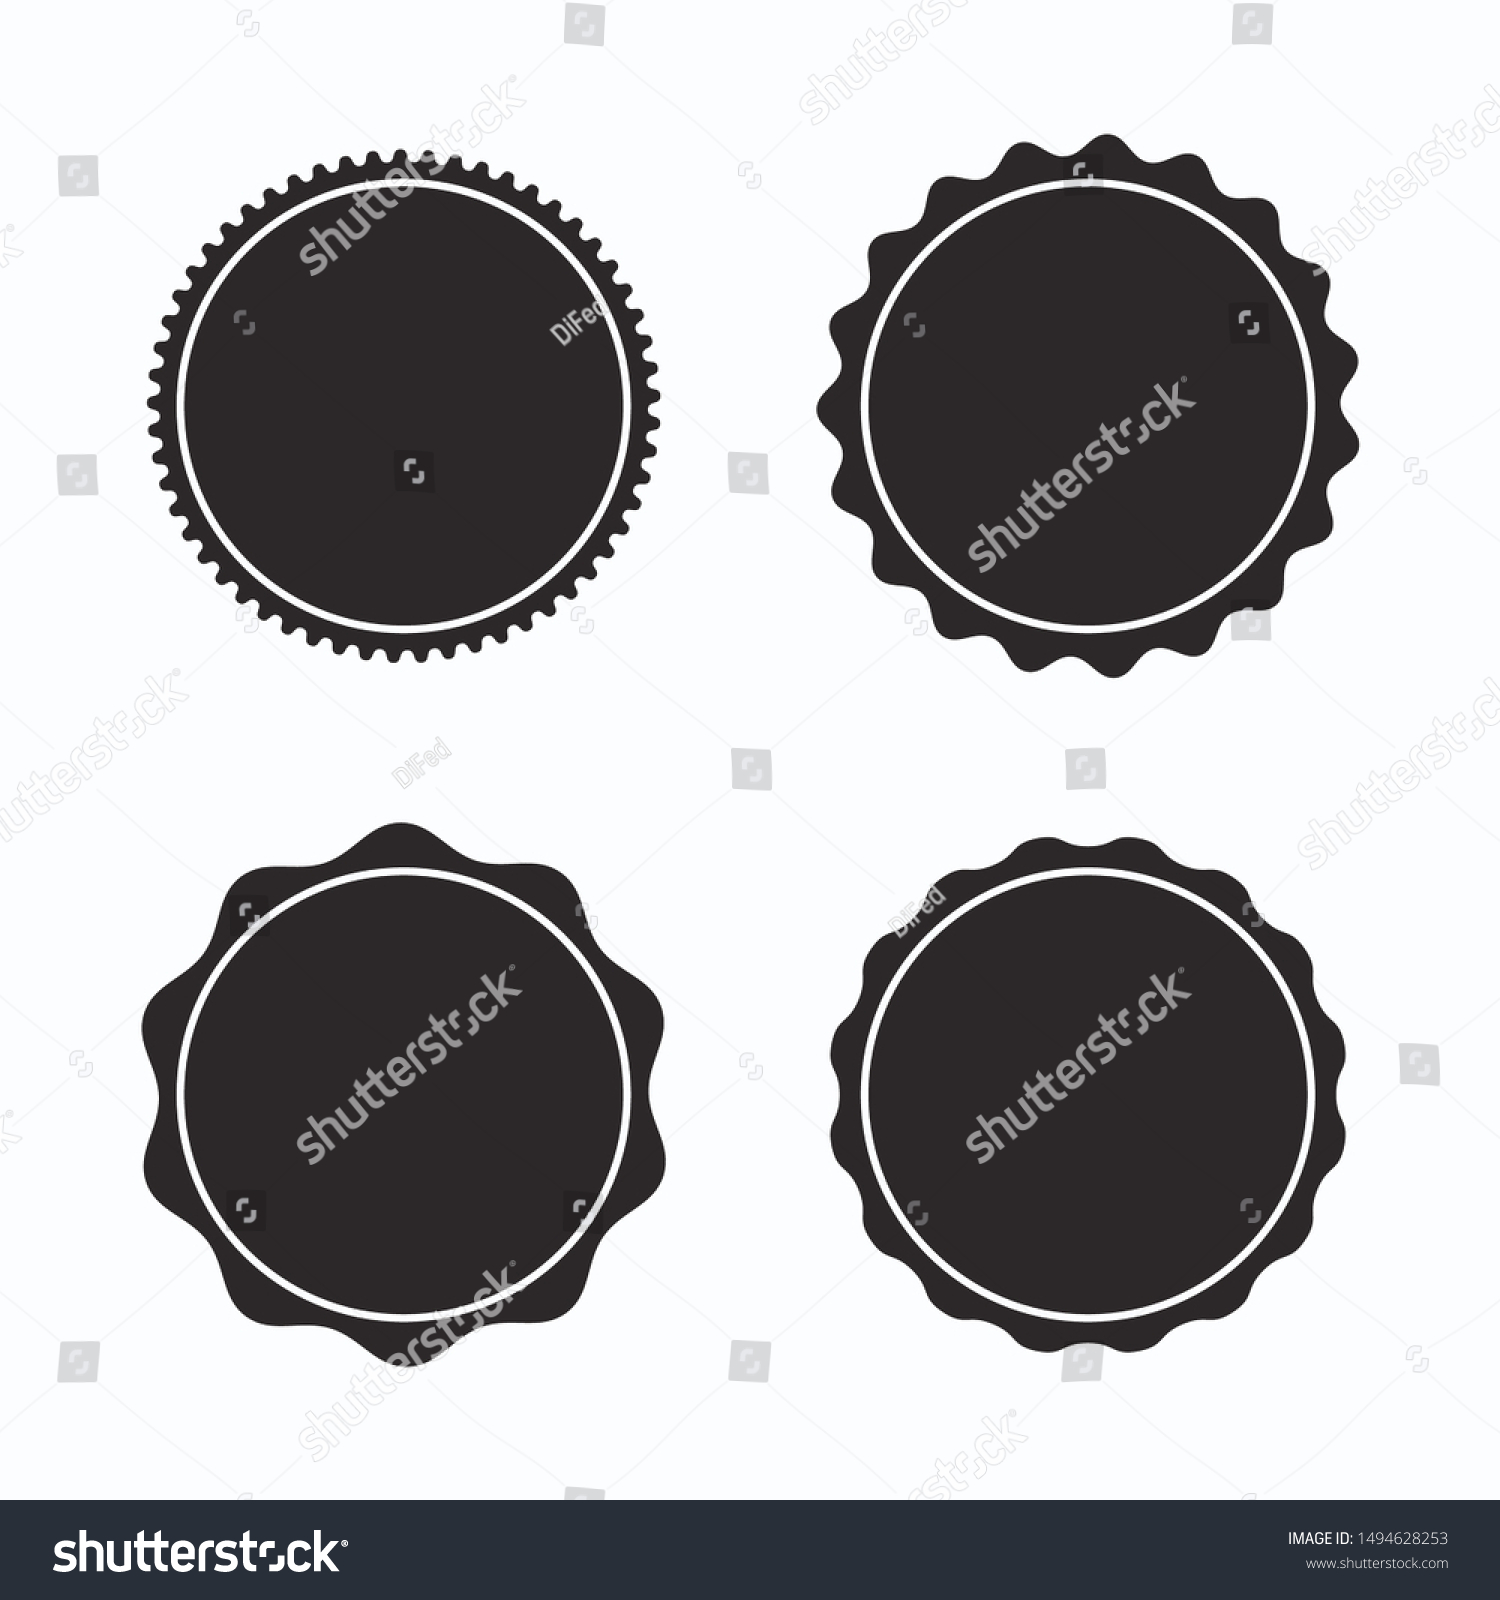 Set of blank stamps. Great for banners, badges, etc #1494628253